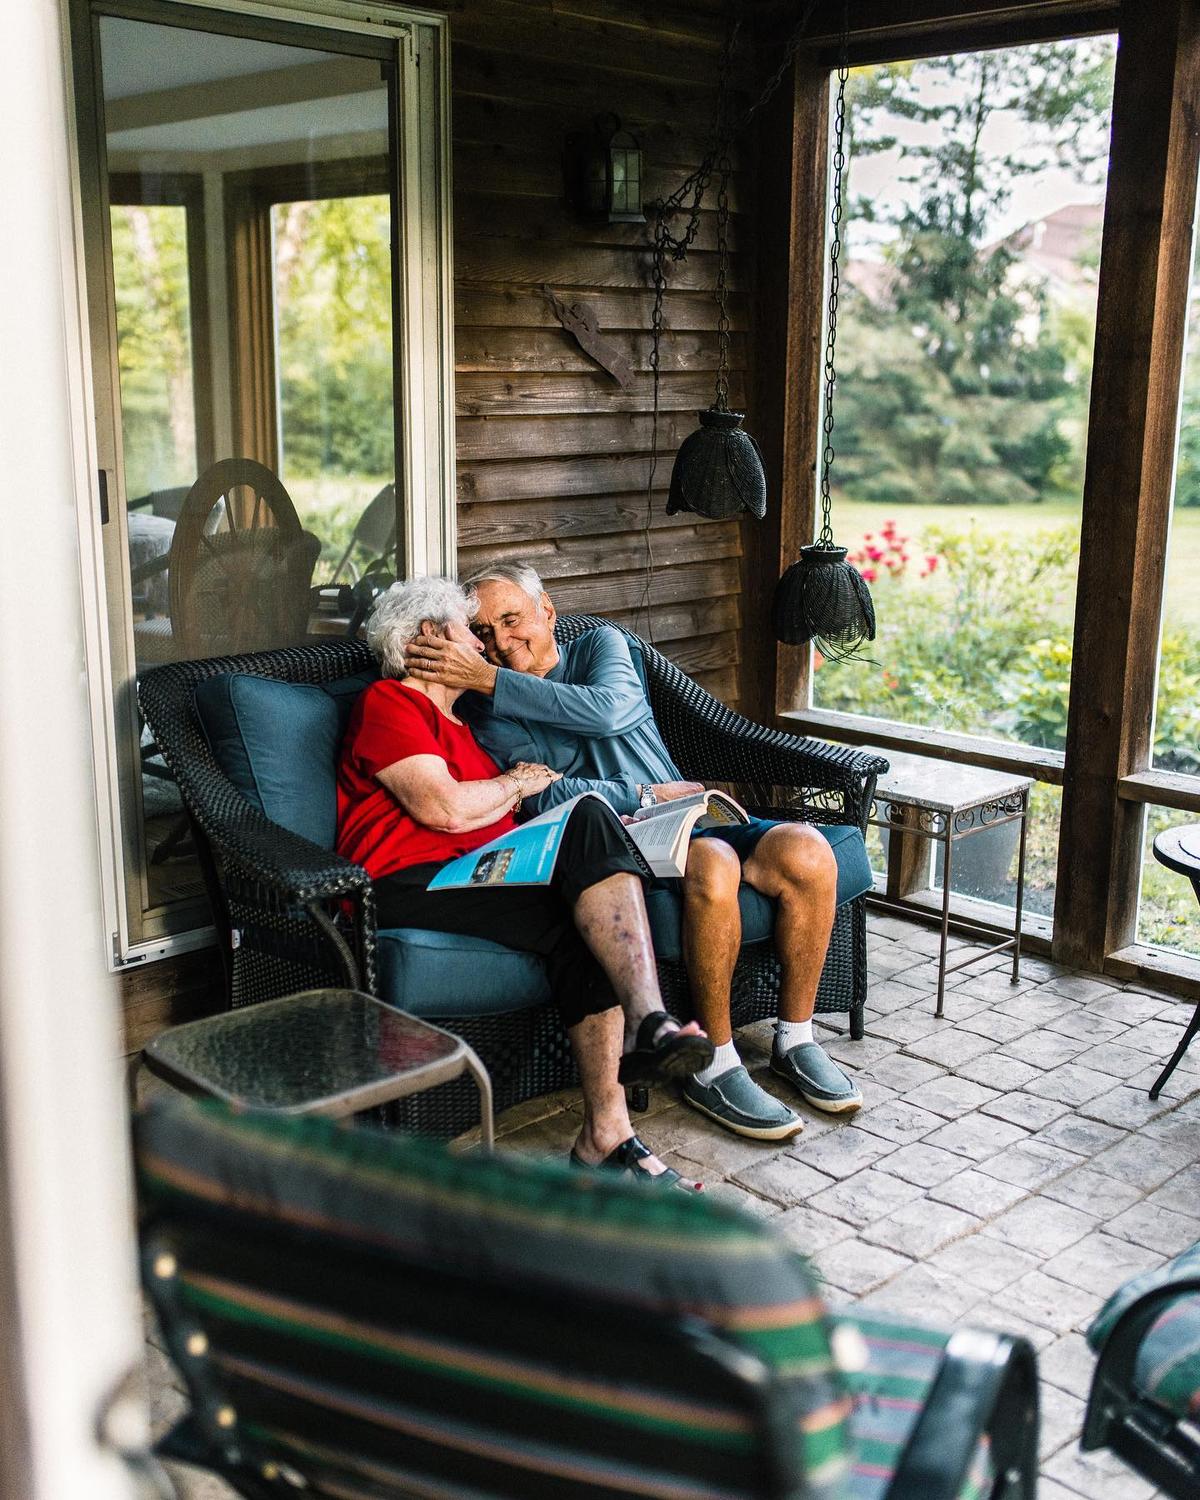 Ruth and Joe in their home of 45 years. (Courtesy of <a href="https://www.instagram.com/mareemiragliaphotography/">Maree Miraglia</a>)